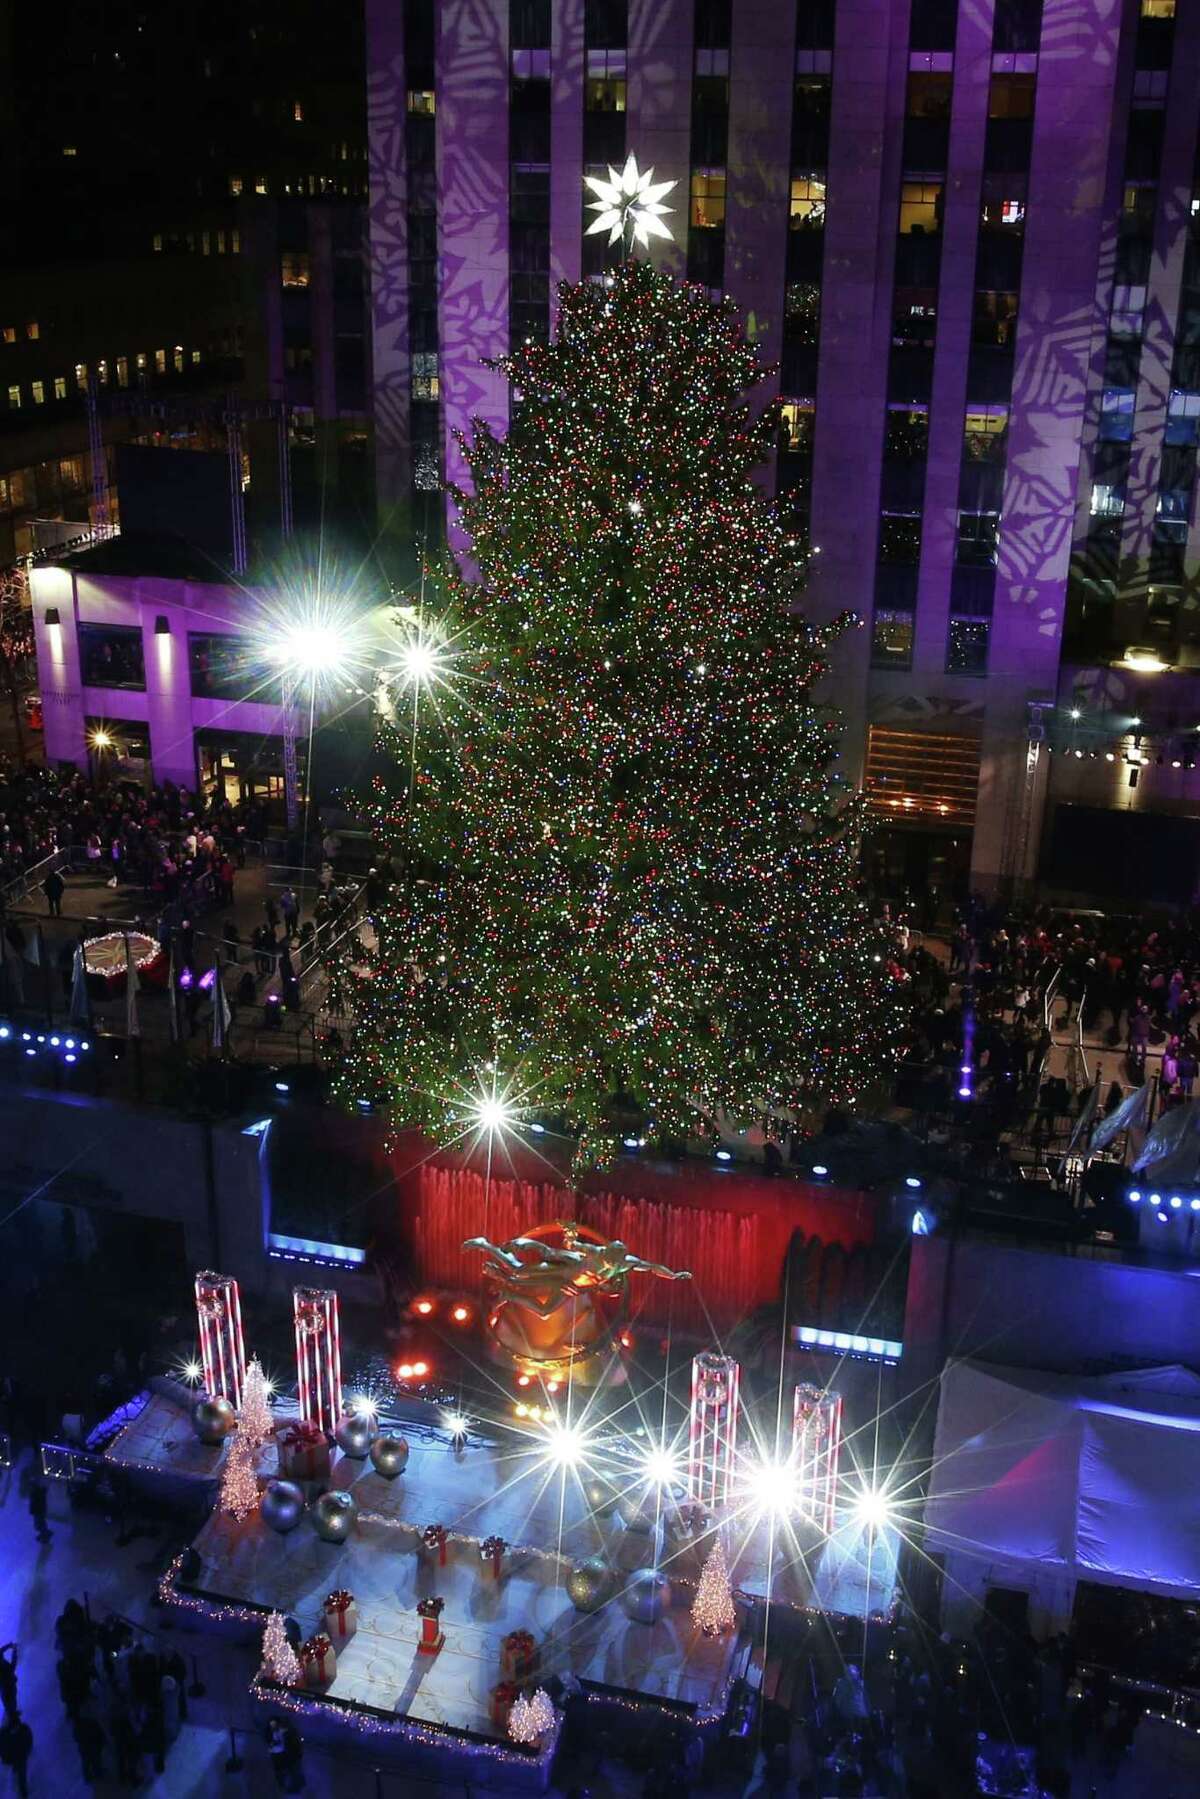 The Rockefeller Center Christmas tree is lit following a ceremony in New York on Wednesday, Dec. 3, 2014. Weighing approximately 13 tons, the 85-foot tall, 90-year-old Norway Spruce is adorned with 45,000 energy efficient LED lights. (AP Photo/Jason DeCrow)